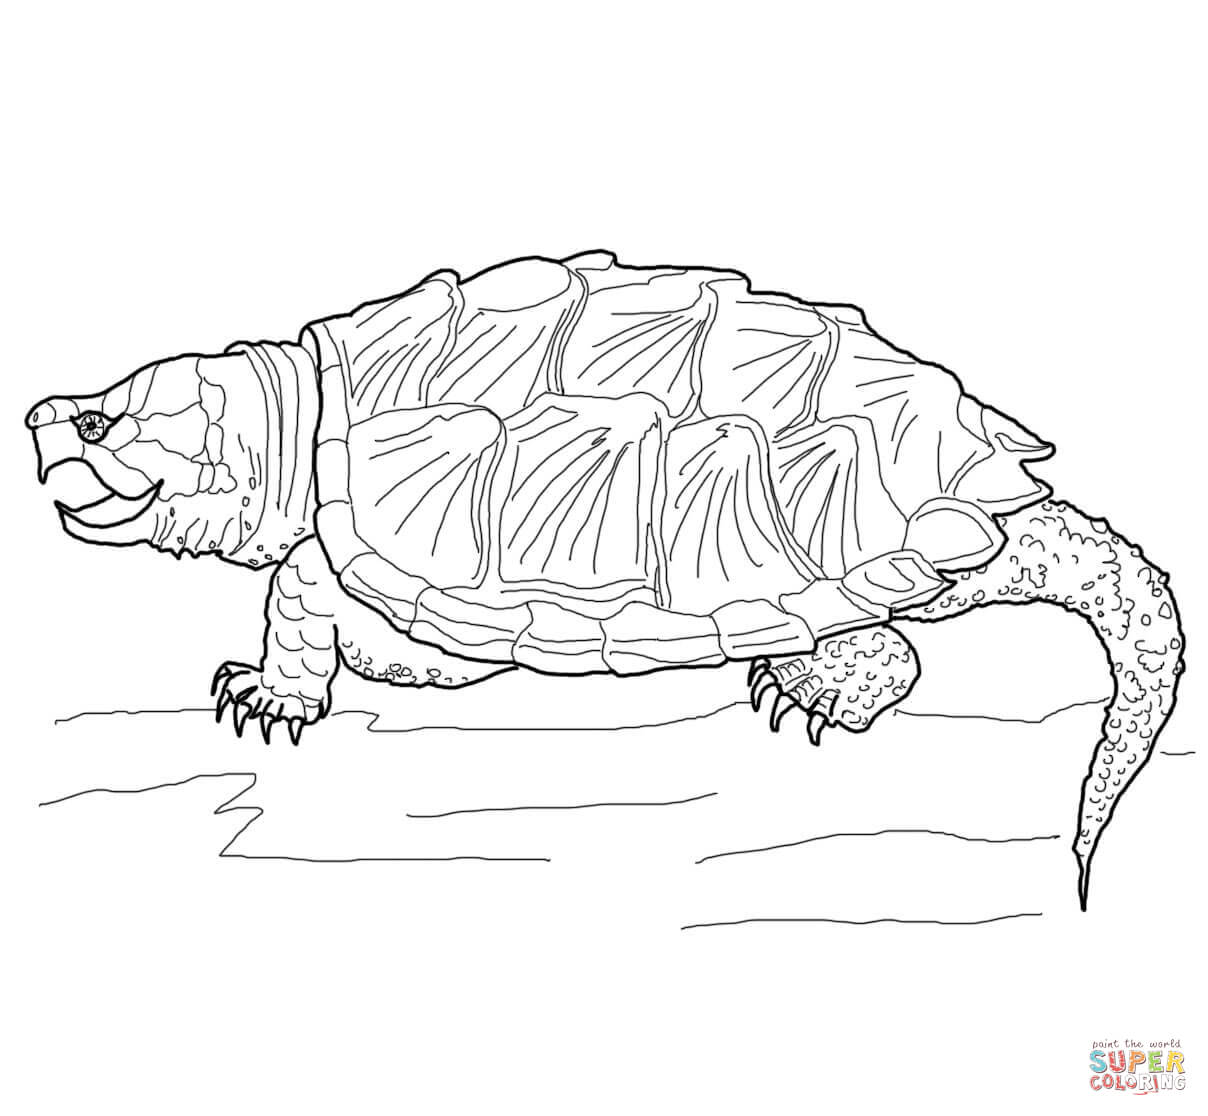 Alligator Snapping Turtle coloring #17, Download drawings